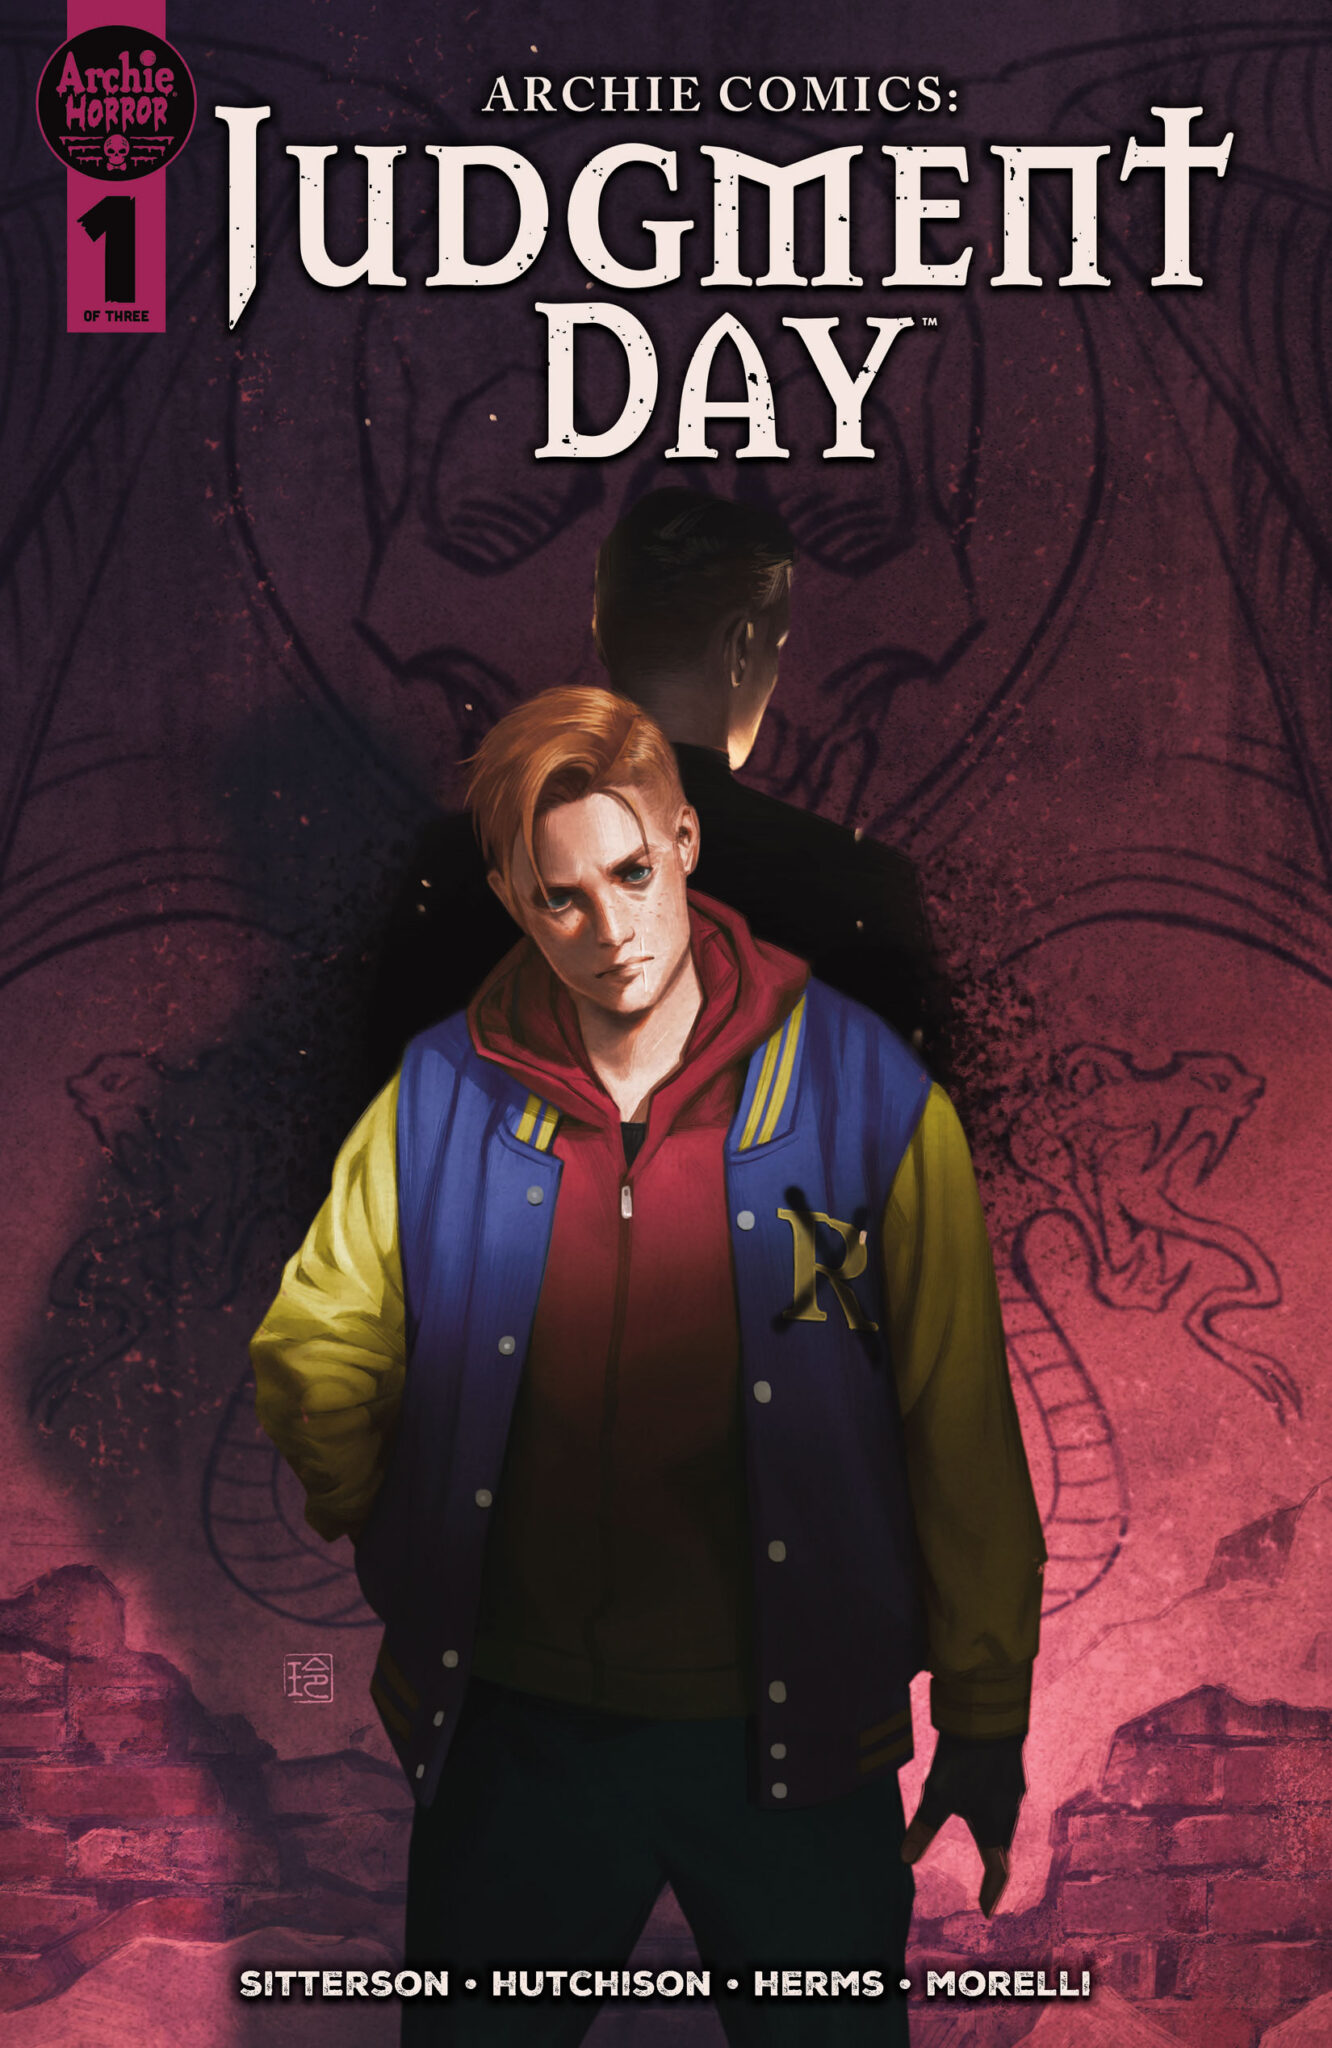 ARCHIE COMICS: JUDGMENT DAY #1 variant cover 